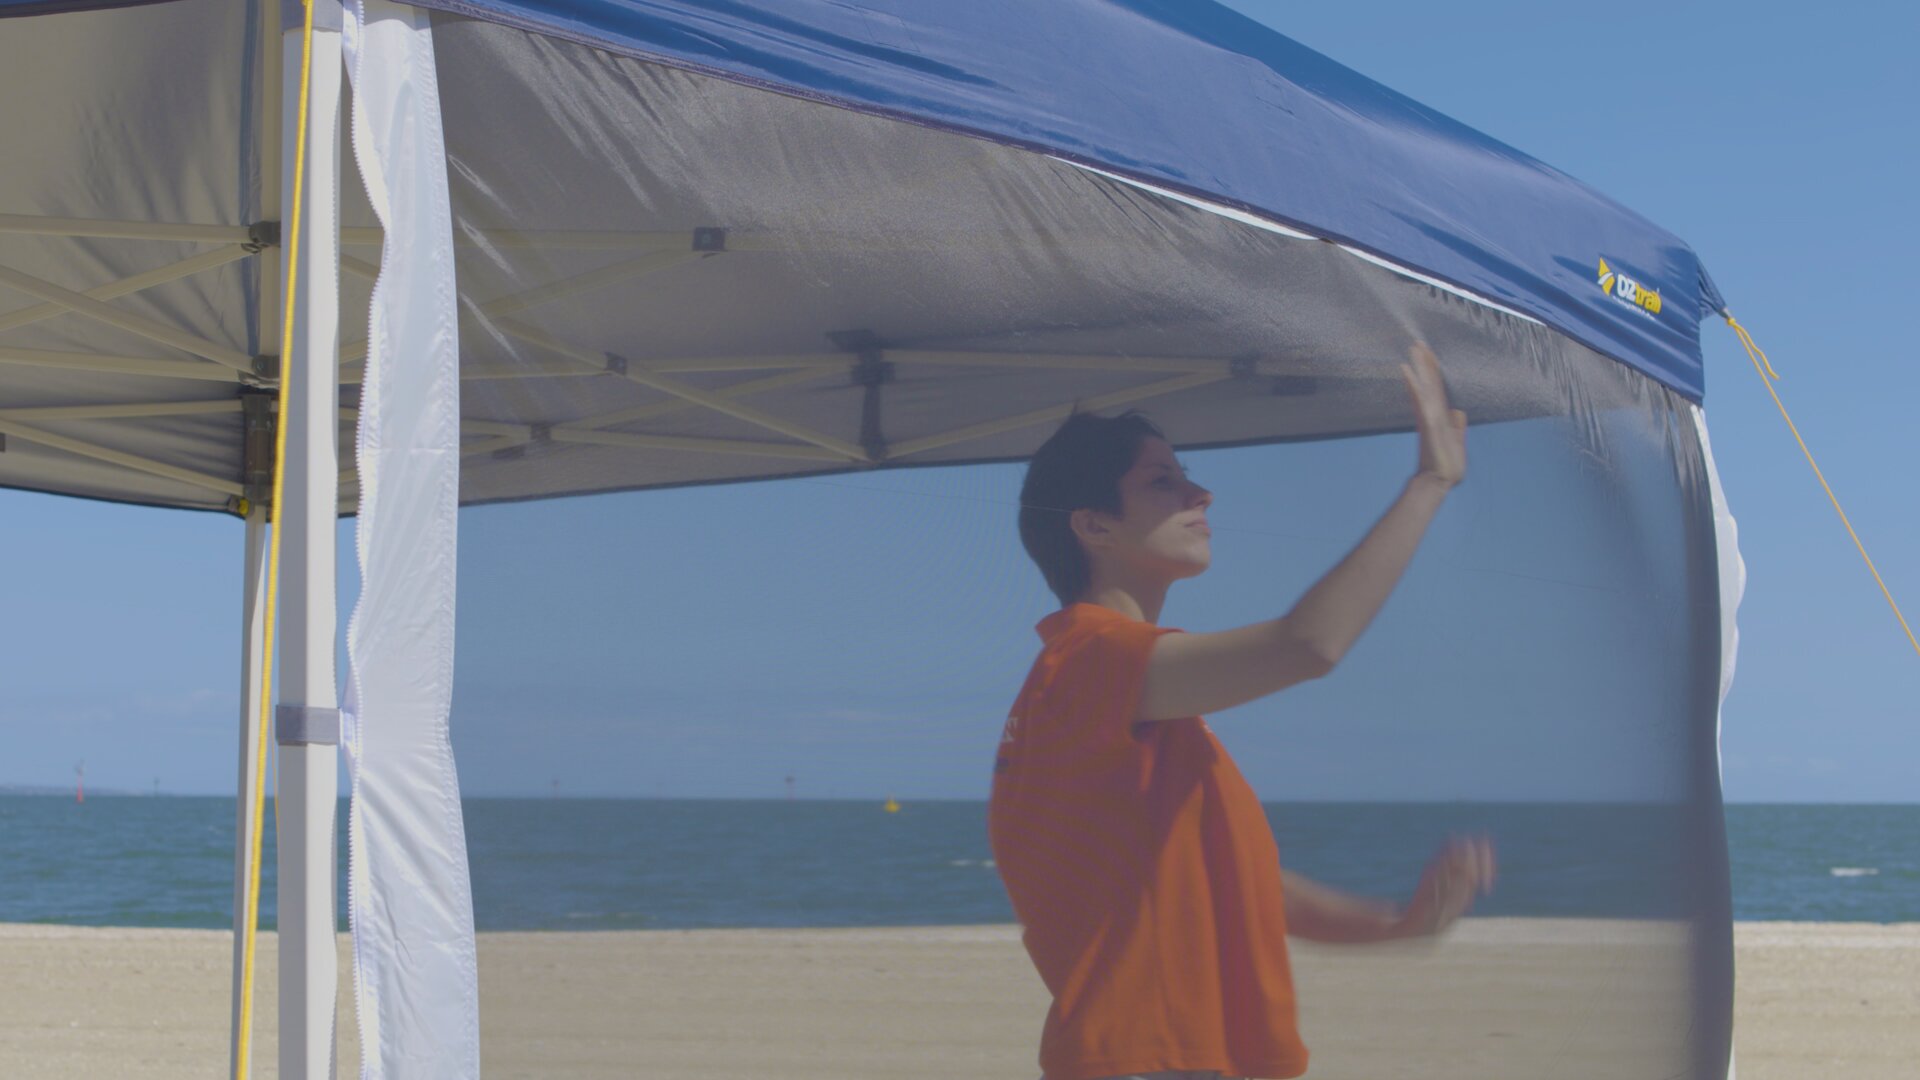 How To Choose A Beach Shelter & Storage - Beach Shelter